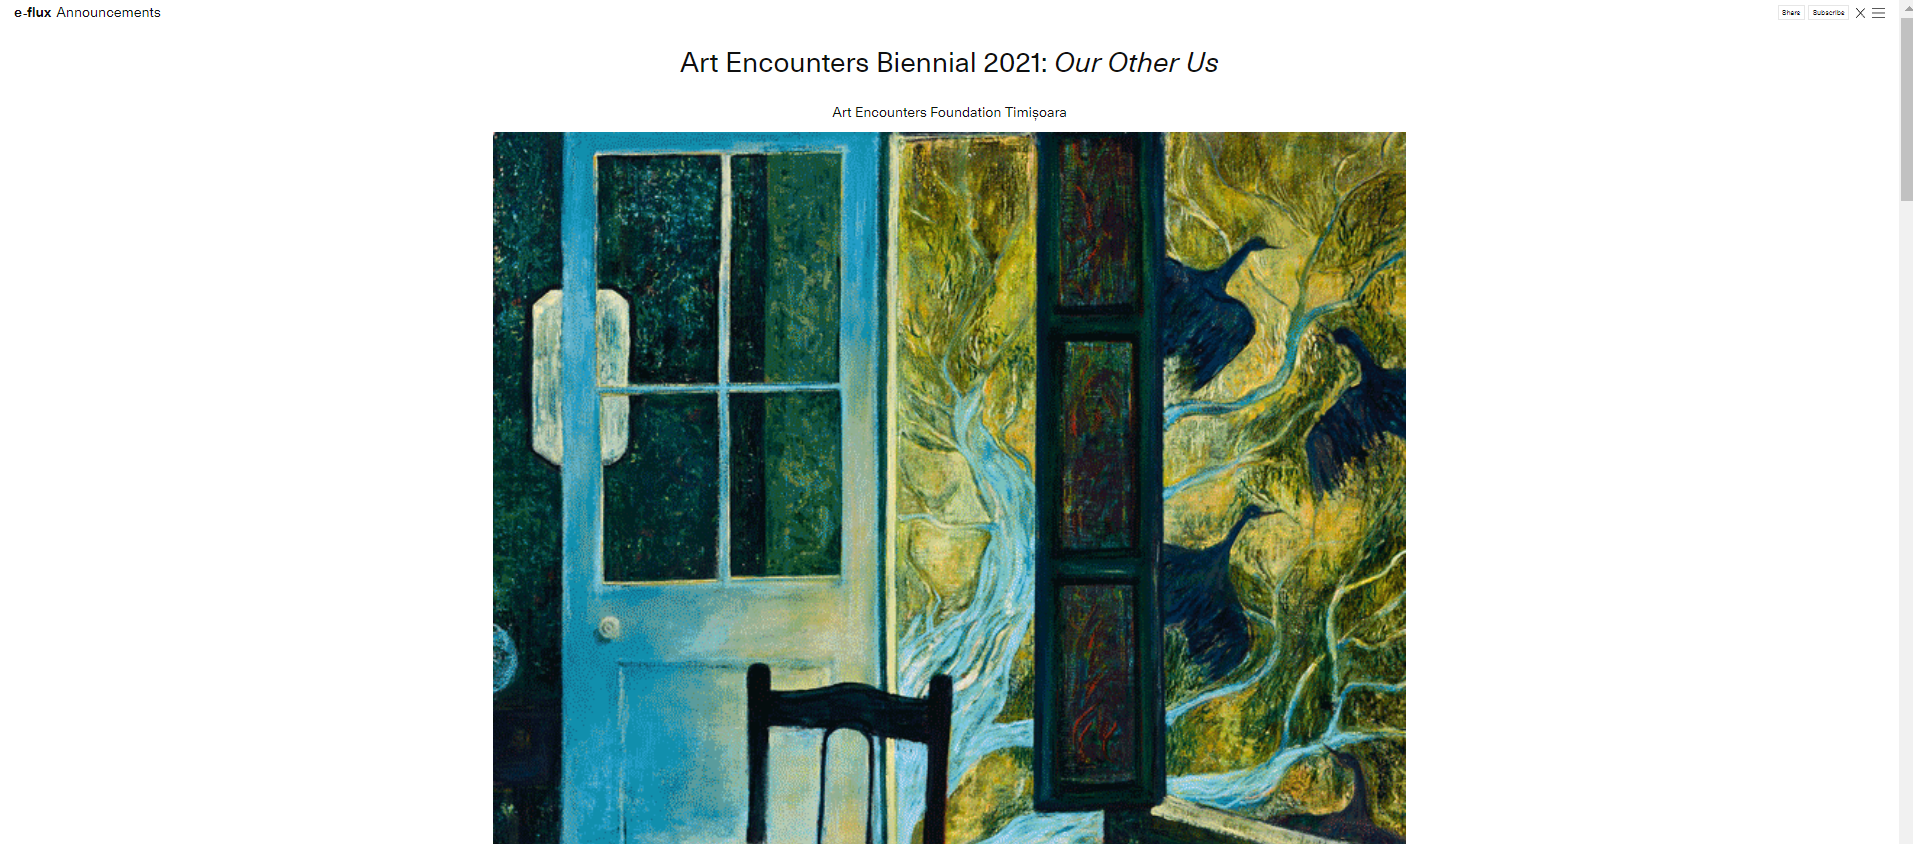 Our Other Us – Art Encounters Biennial